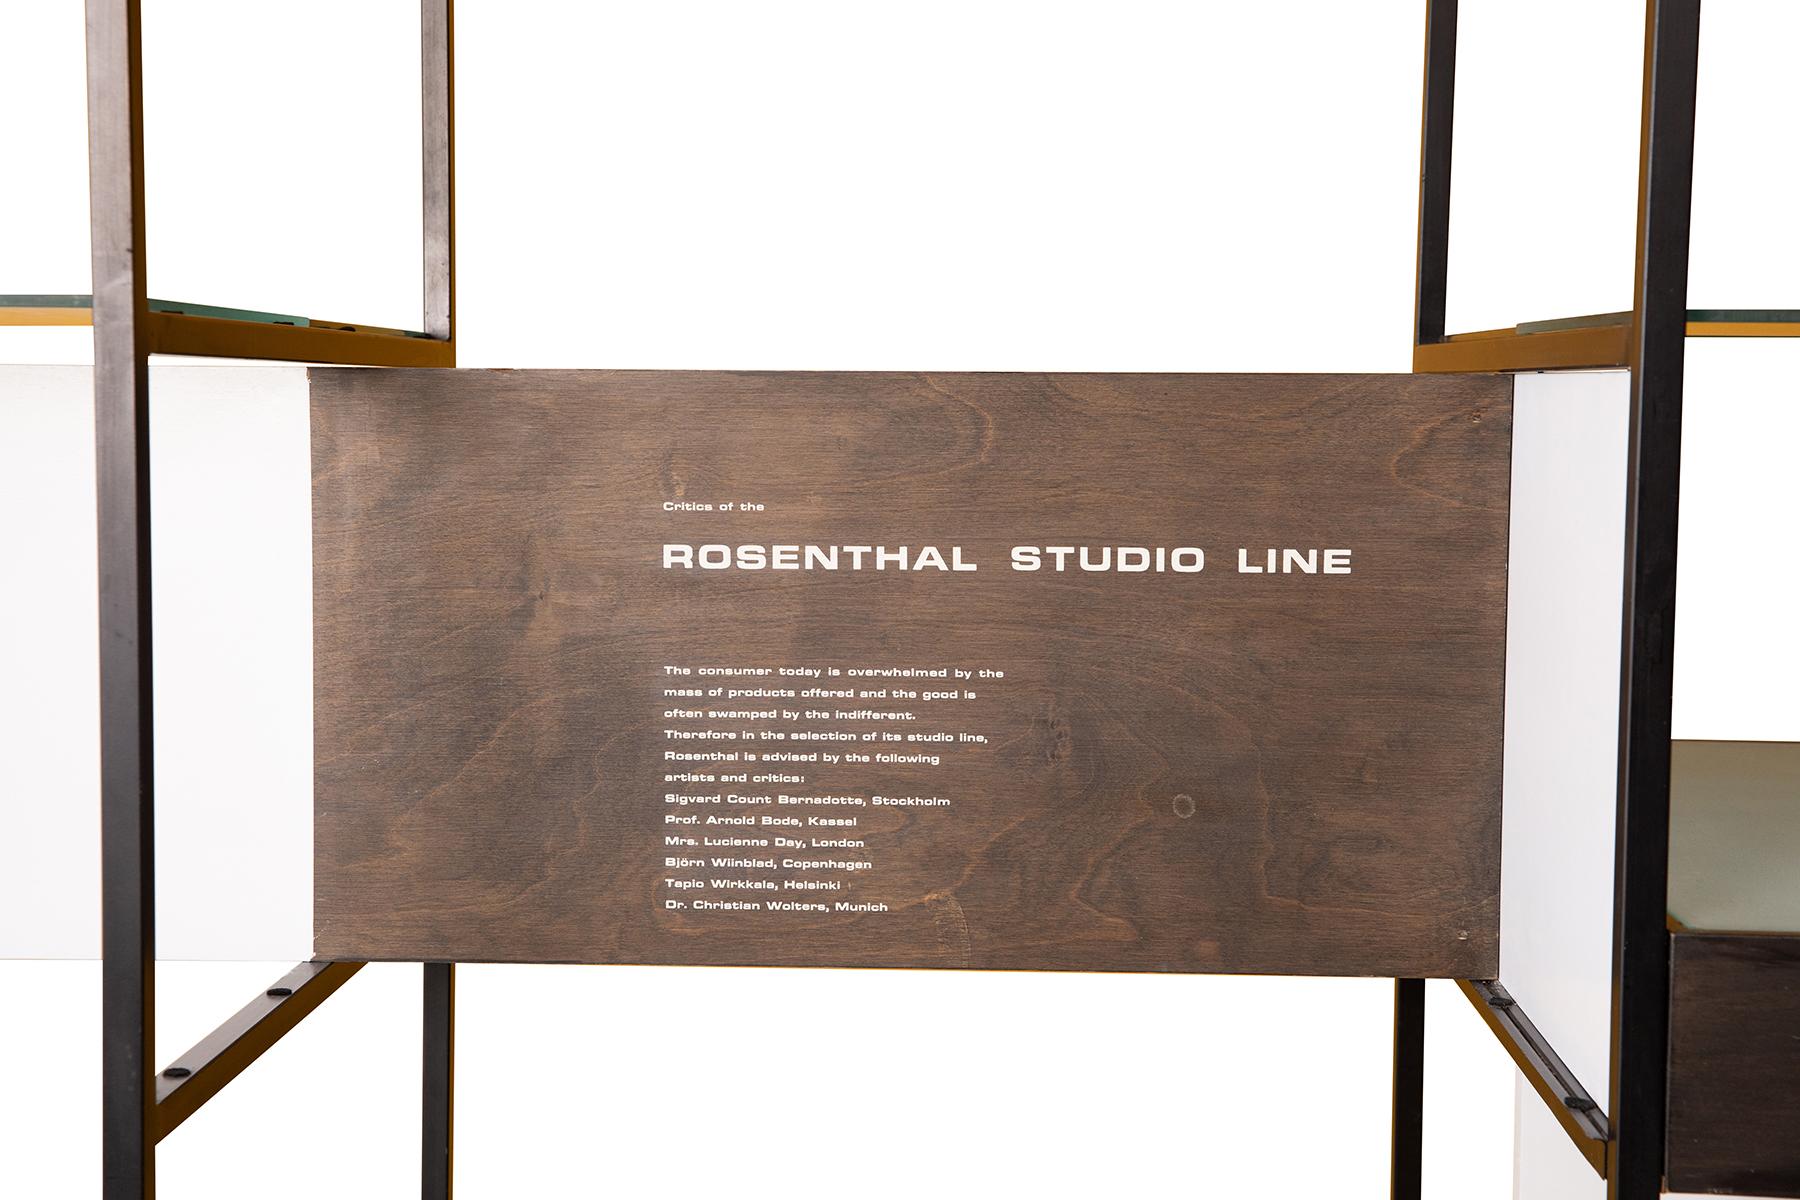 Rosenthal studio-line free standing wall unit, circa mid-1960s. This example was an original display model for Rosenthal and was designed to highlight the works of Wirkaala, Bjorn Wiinblad and Raymond Loewy among others. The frame is patinated iron,